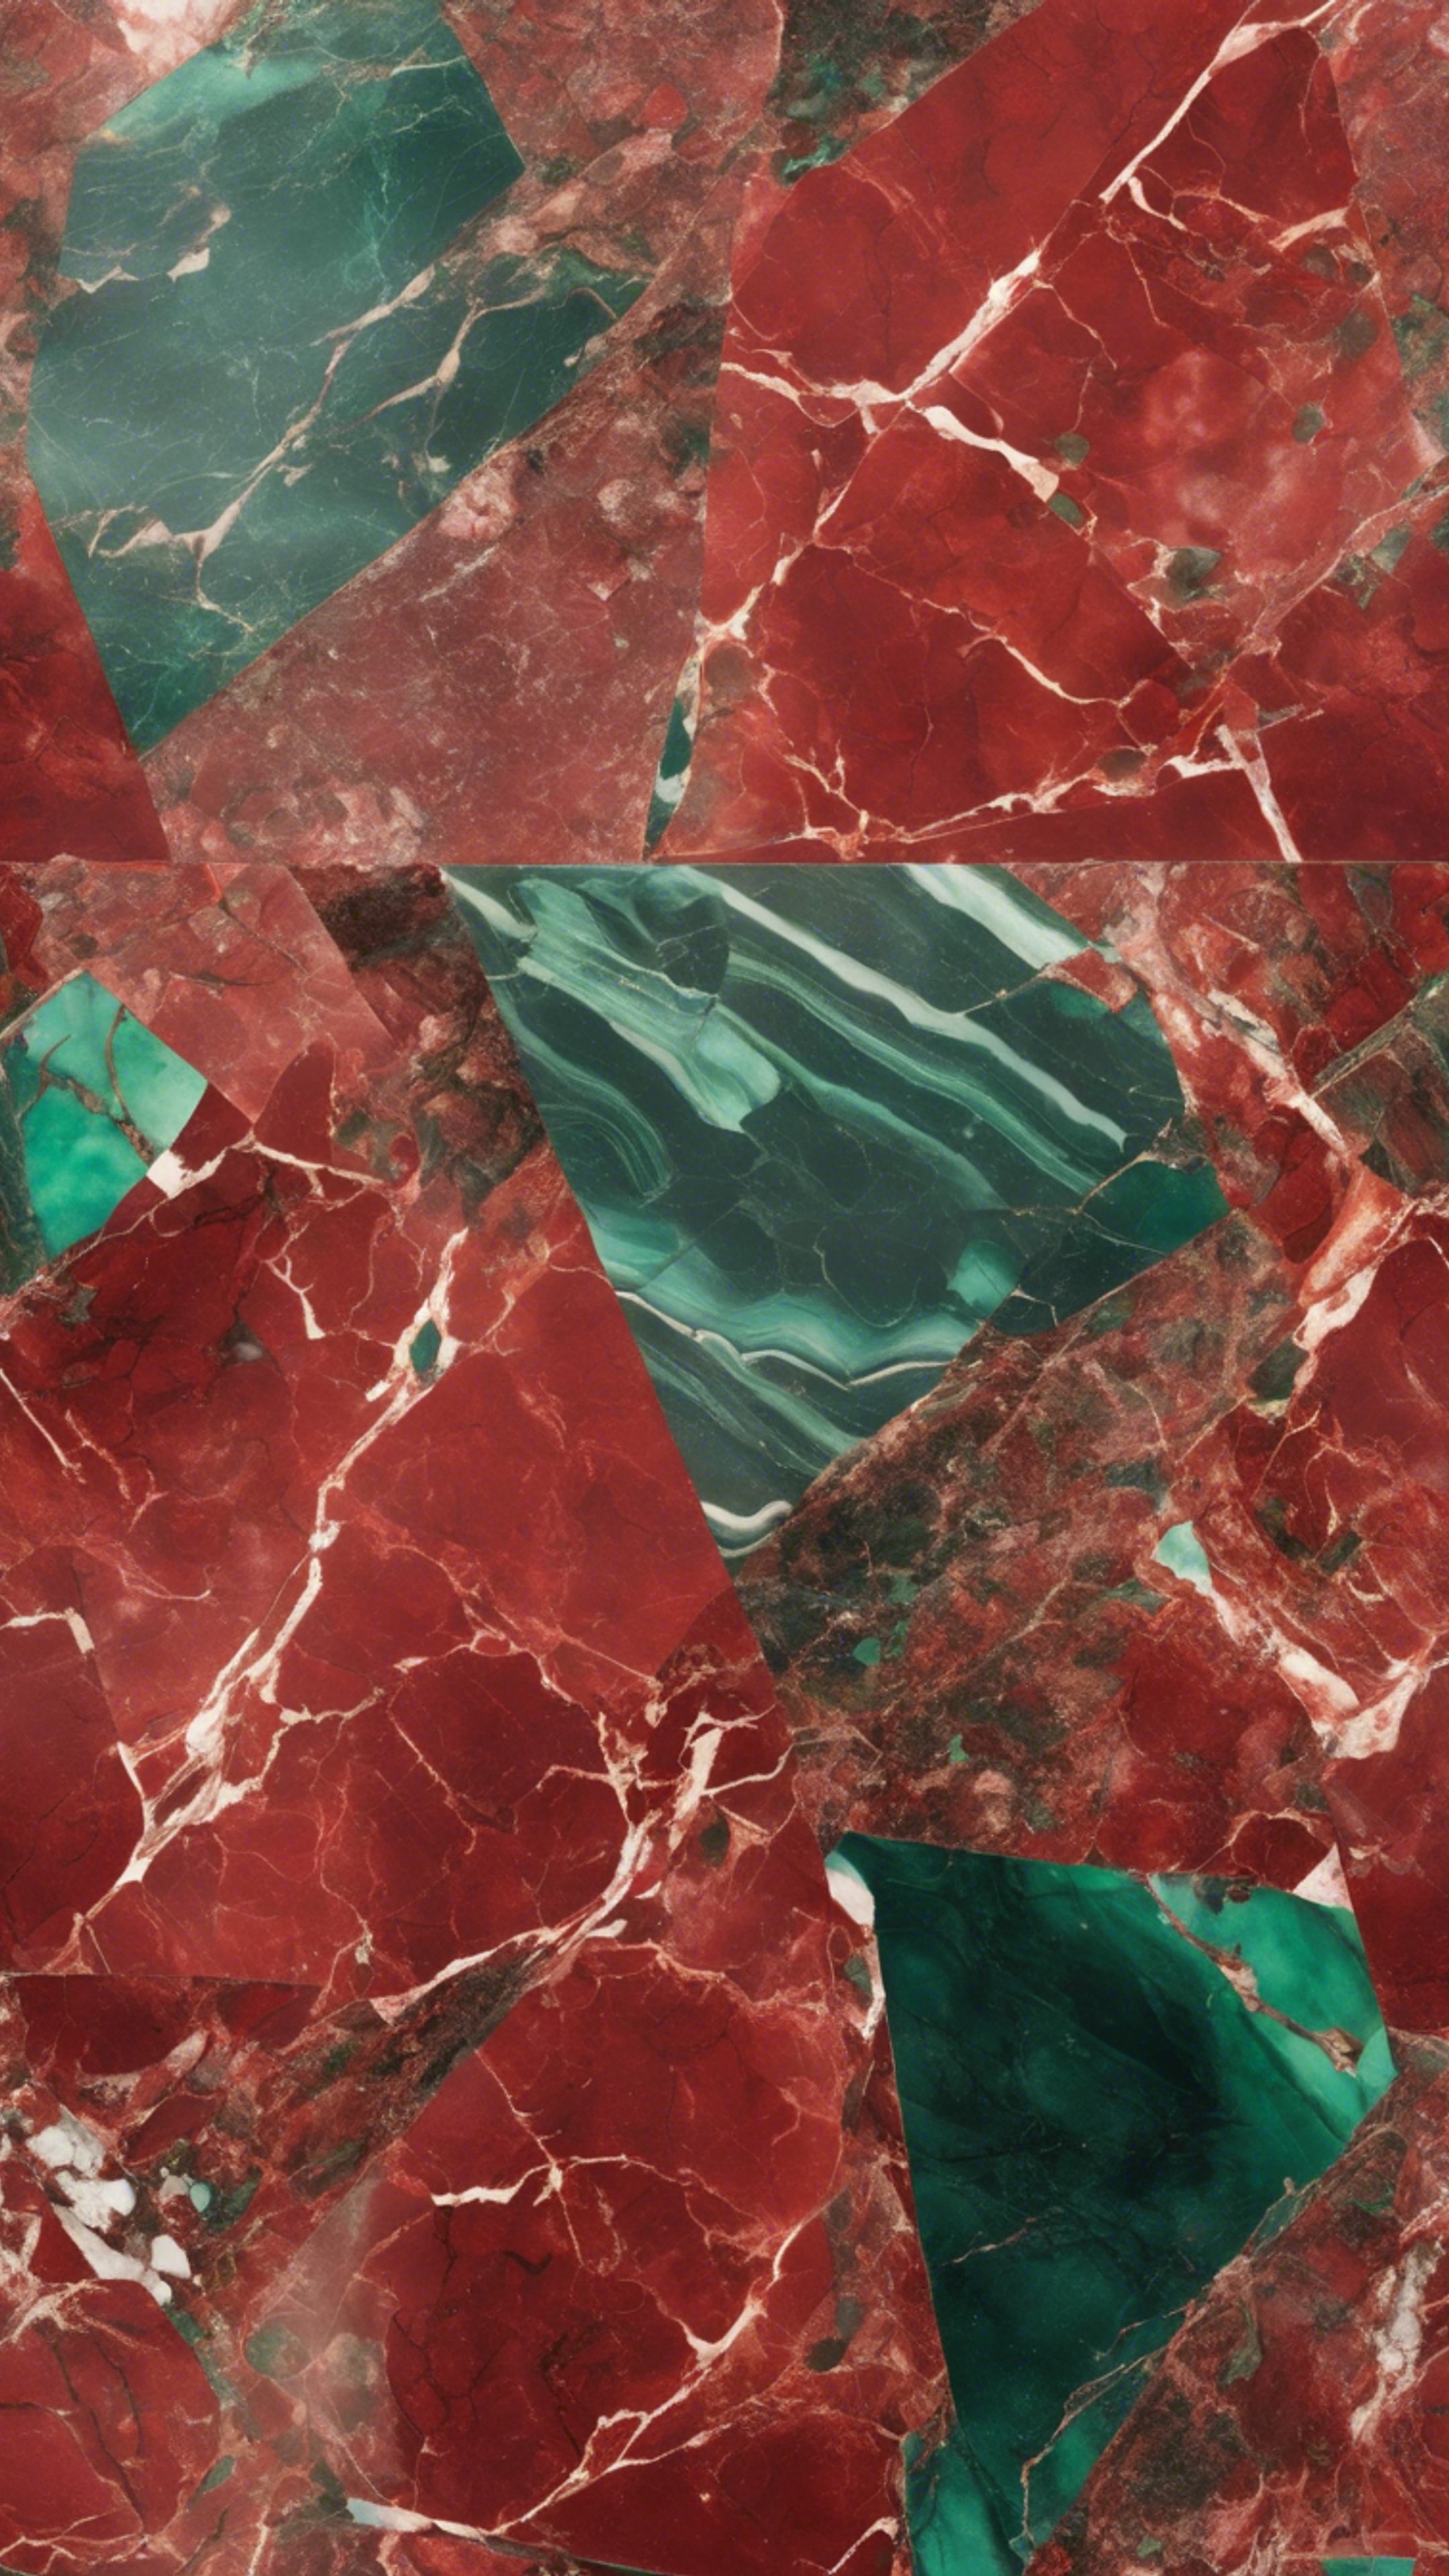 Artistic red and green marble pattern showing rich textures. Валлпапер[98bc637281684a3dba4a]